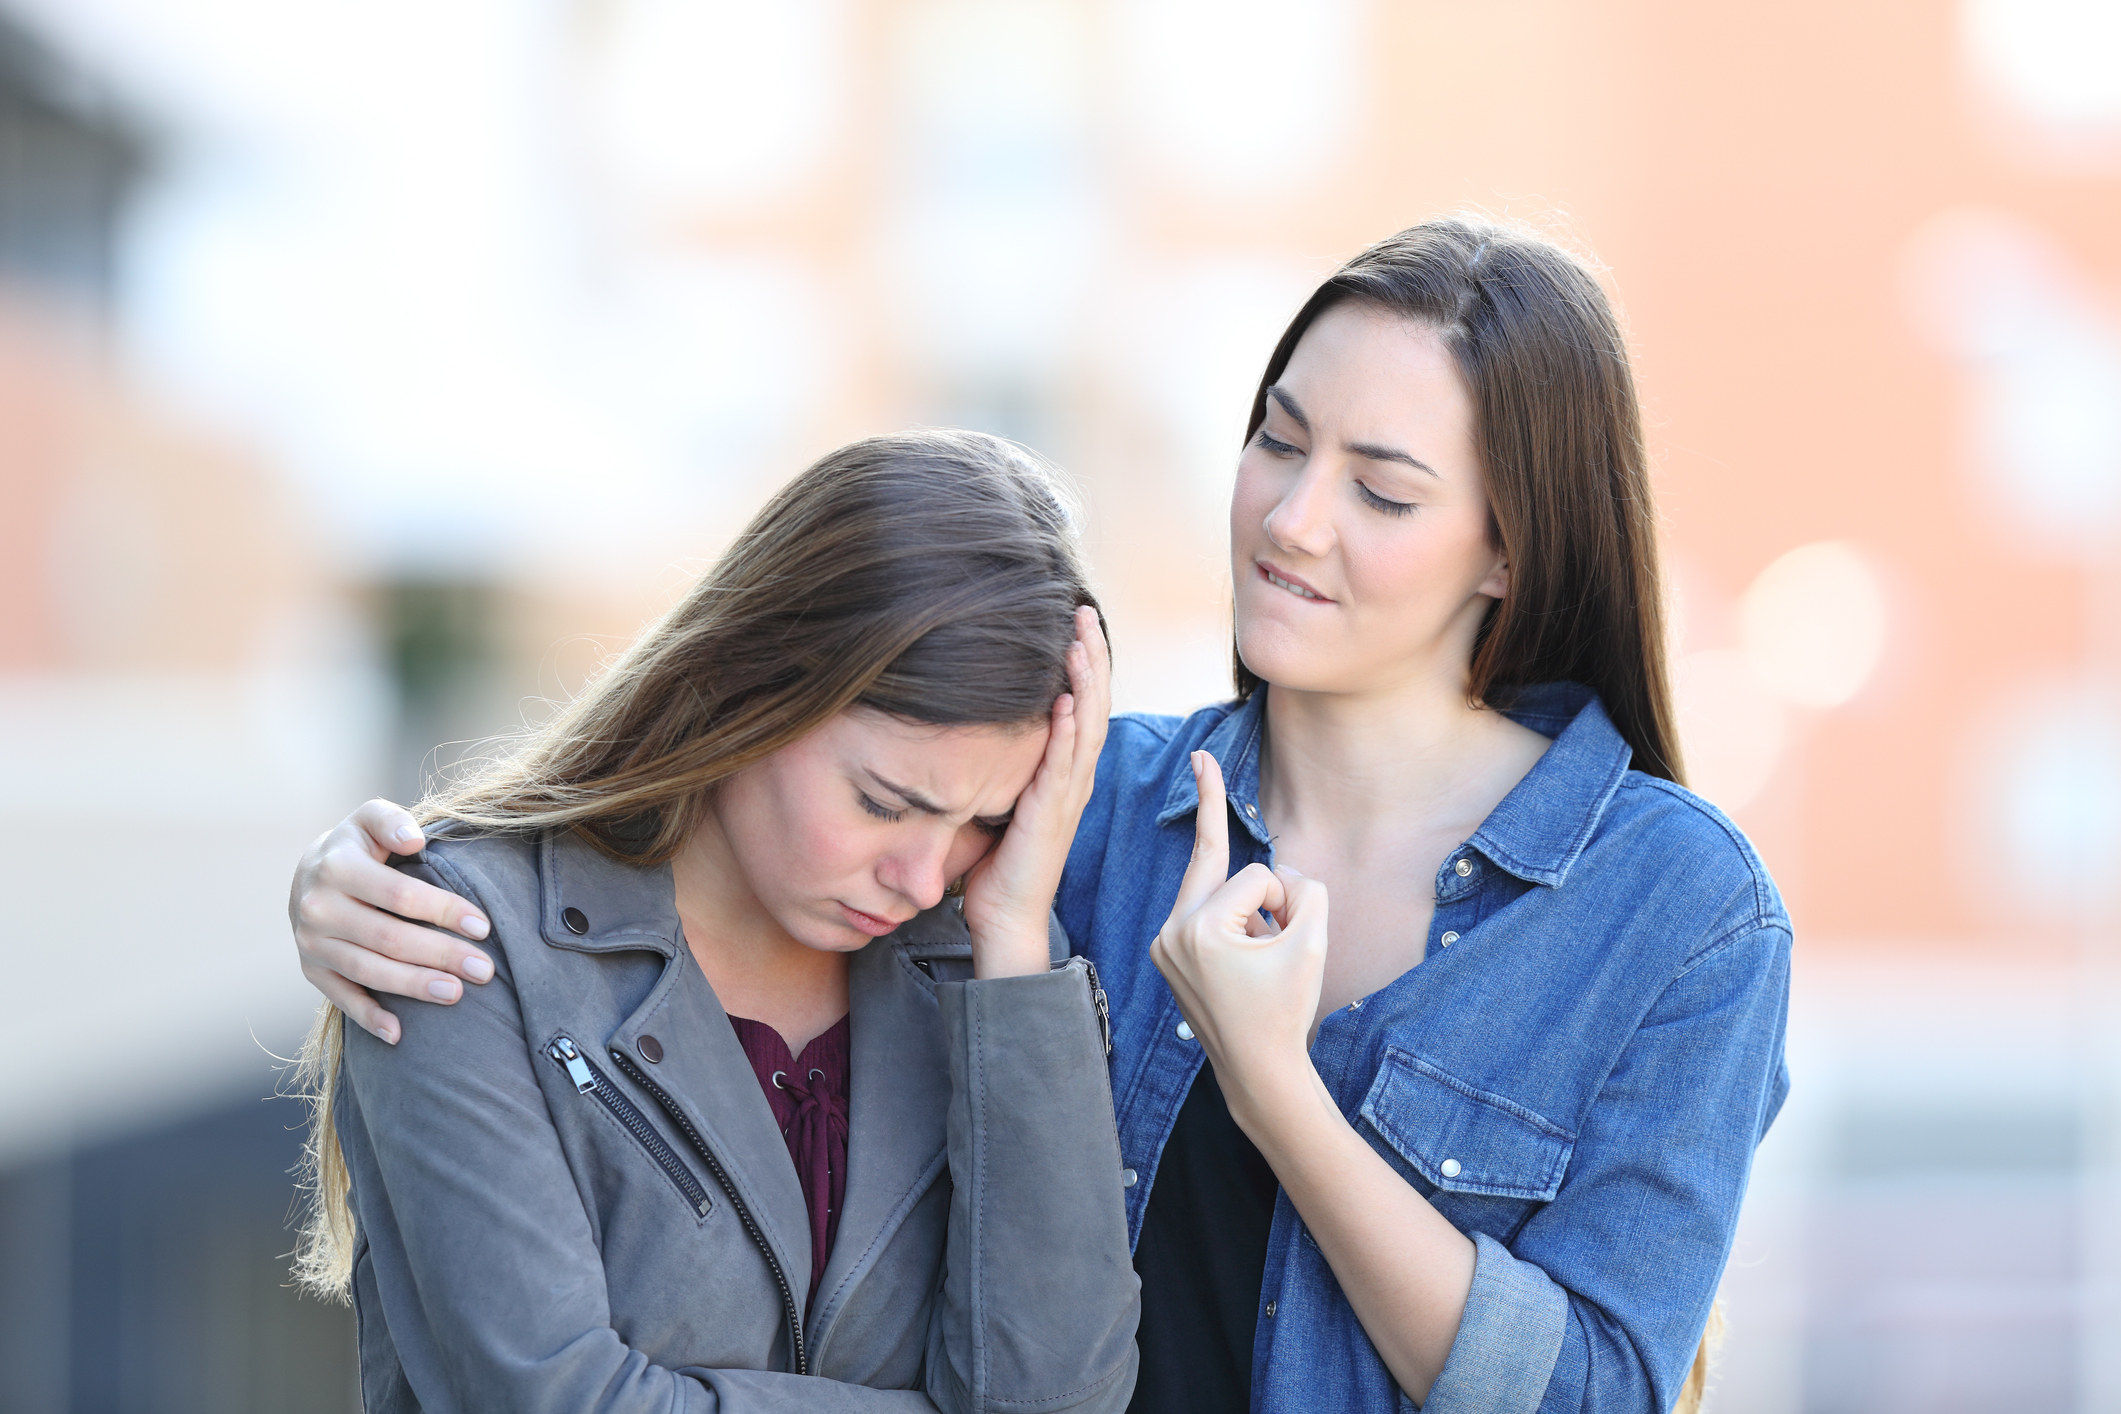 Young woman giving the middle finger to another young woman